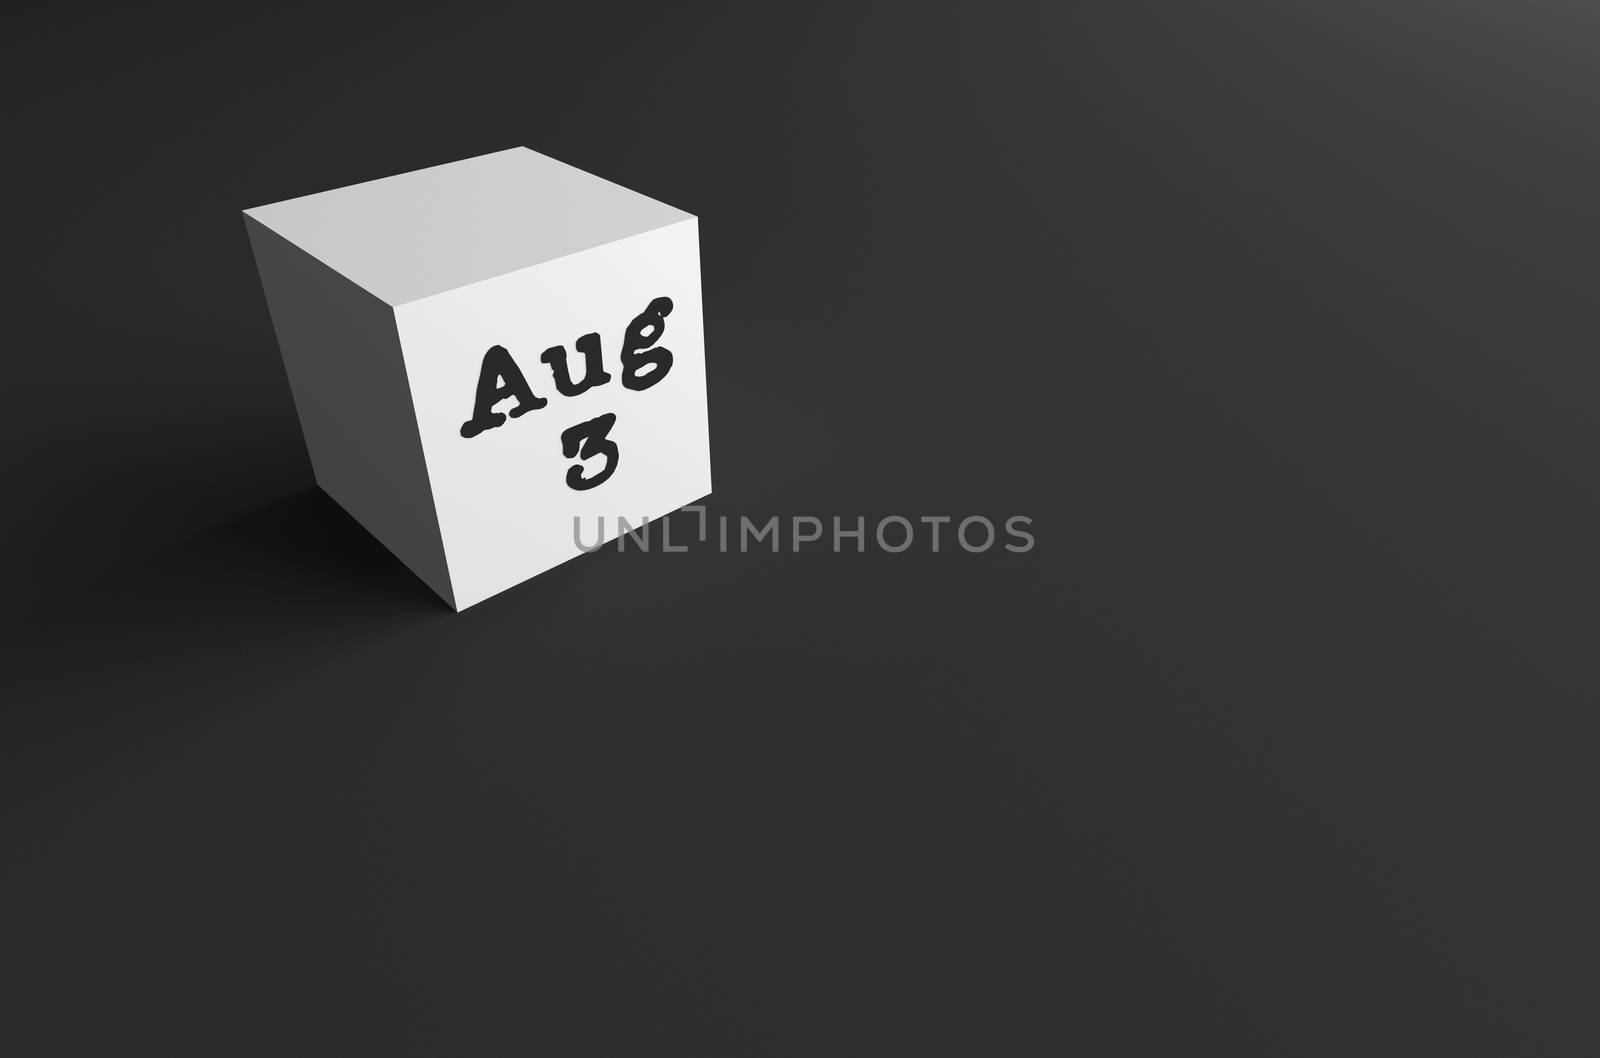 3D RENDERING OF Aug (ABBREVIATION OF AUGUST) 3 ON WHITE CUBE